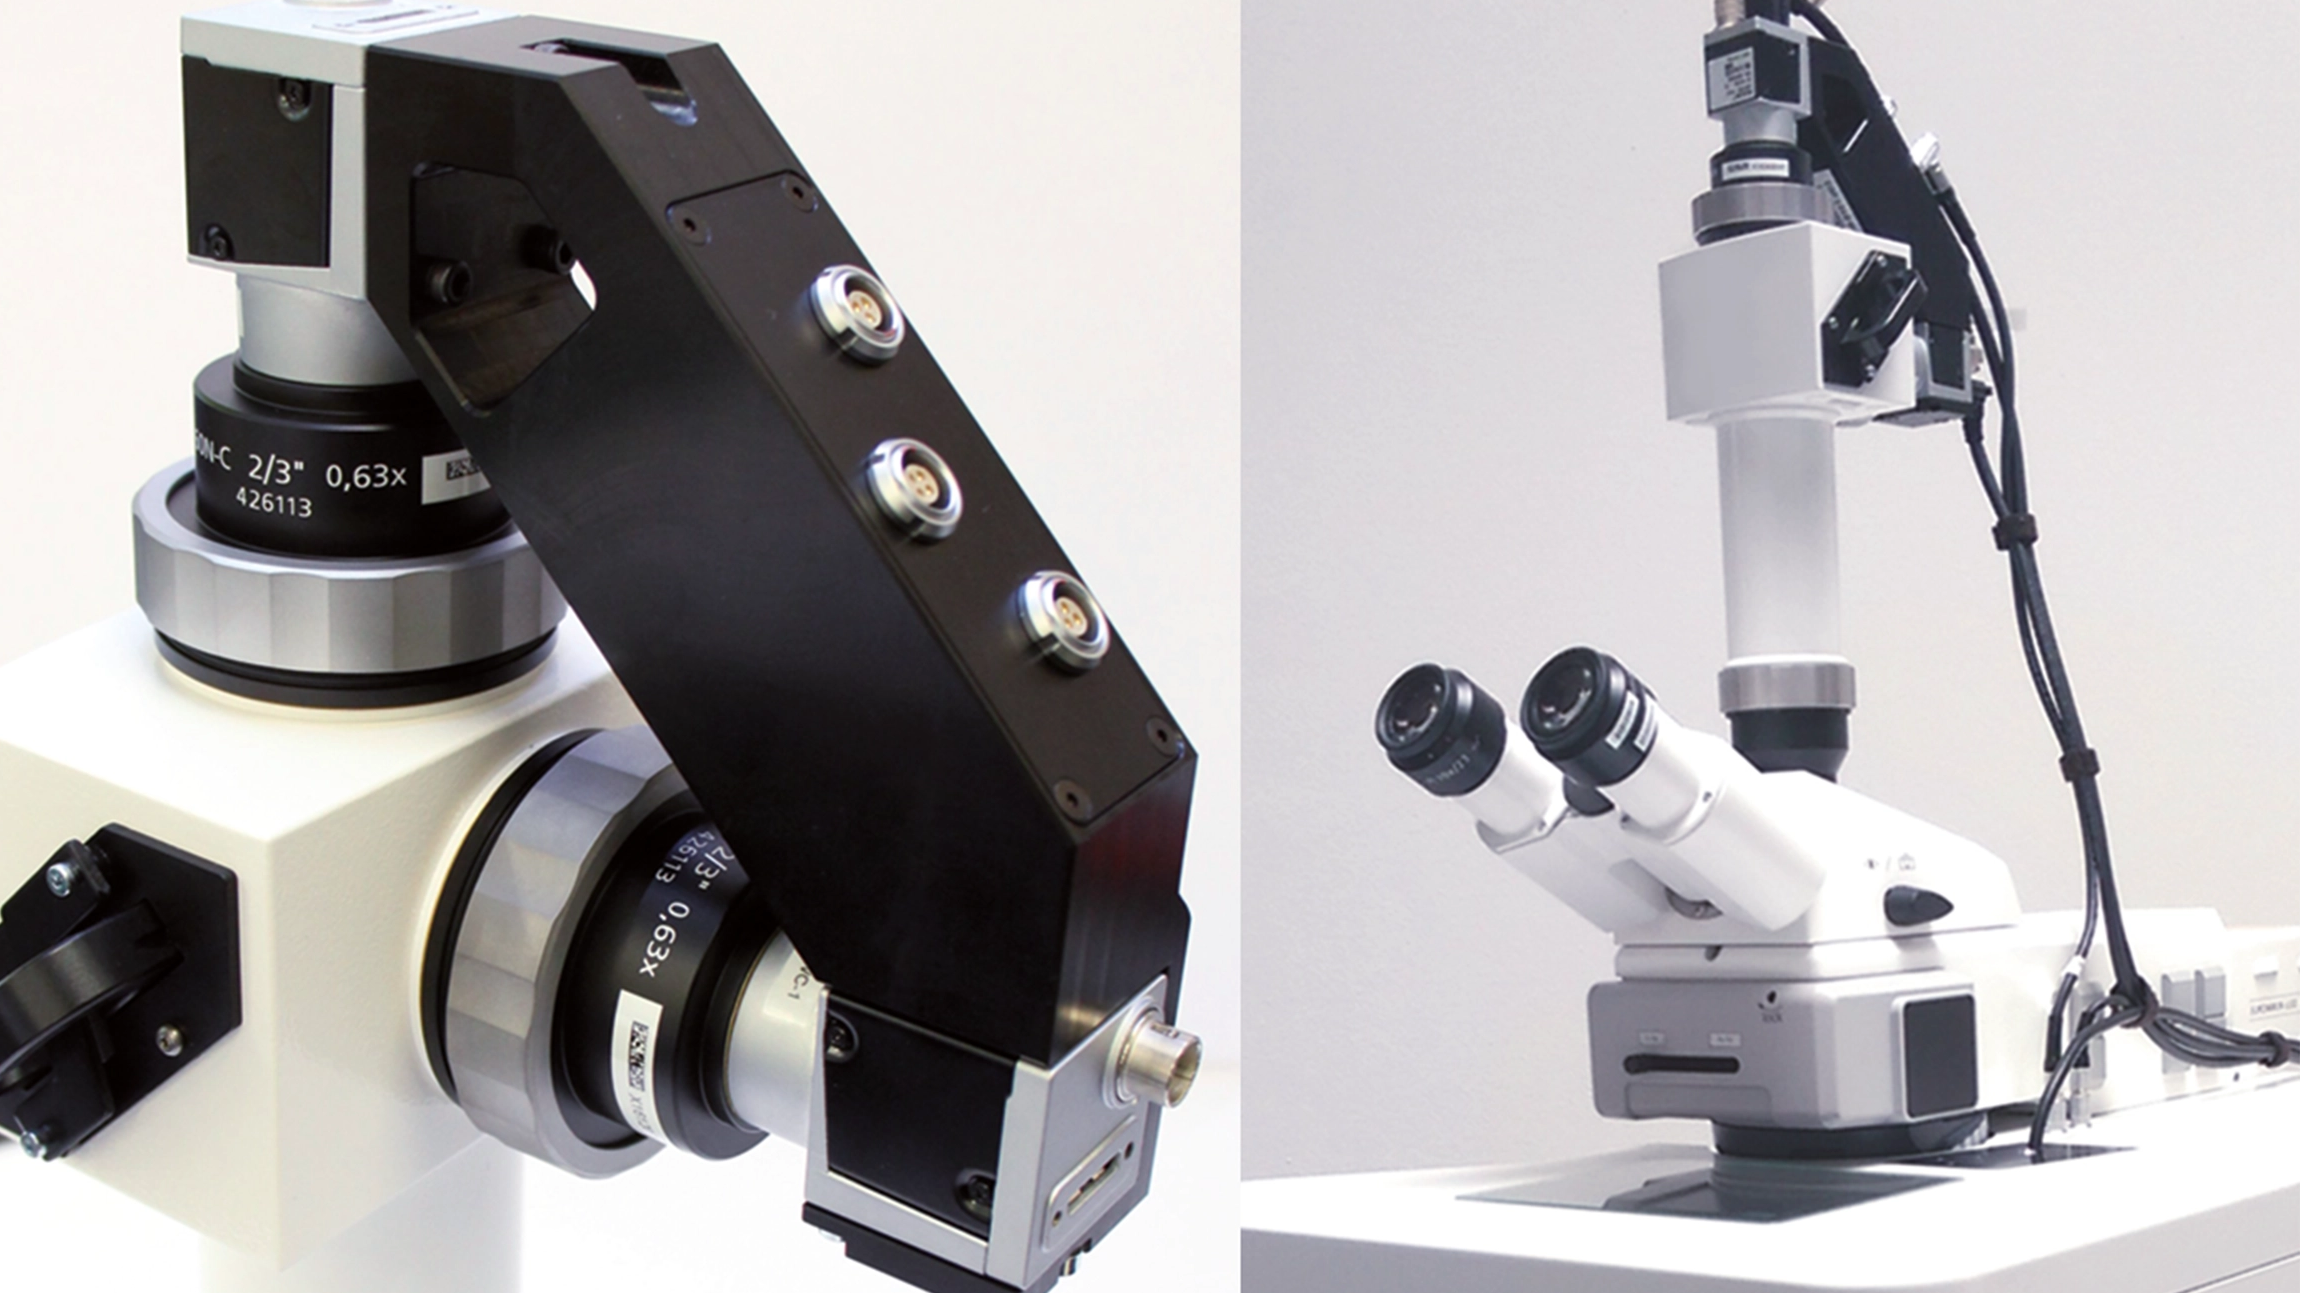 USB cameras for microscopy imaging: use the full microscope power